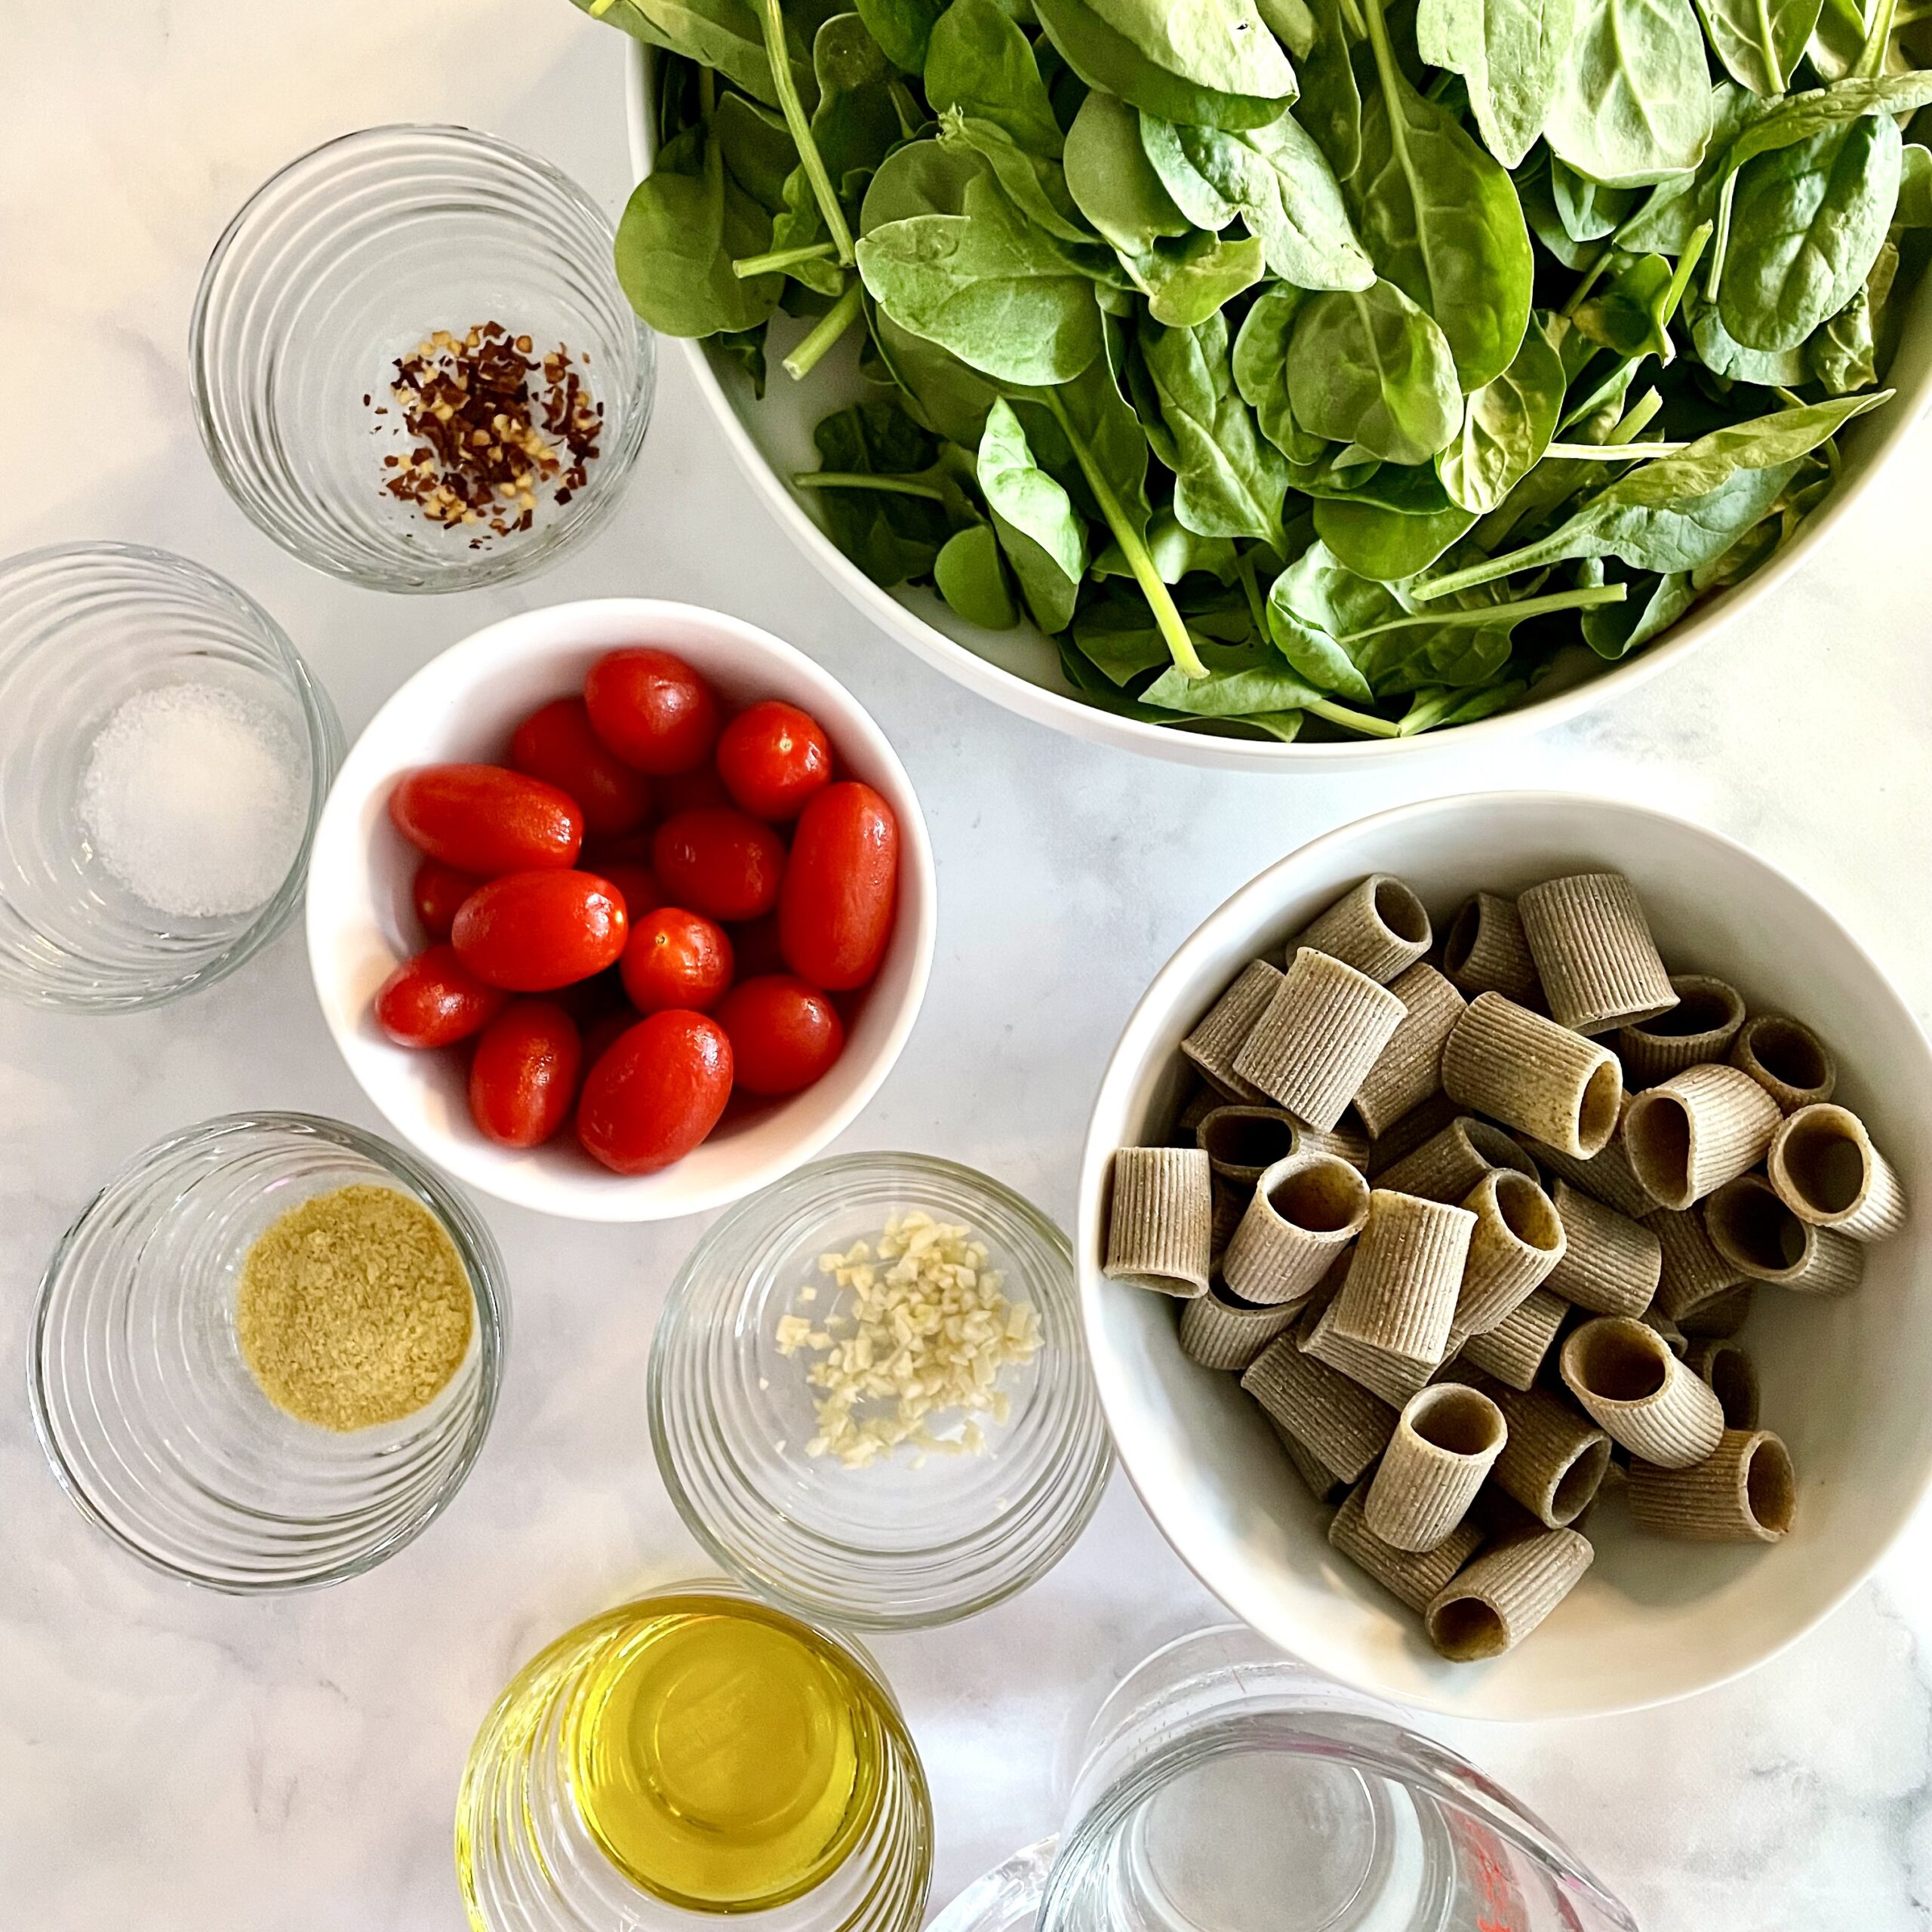 ingredients for easy one-pot pasta with lemony greens and cashew cheese